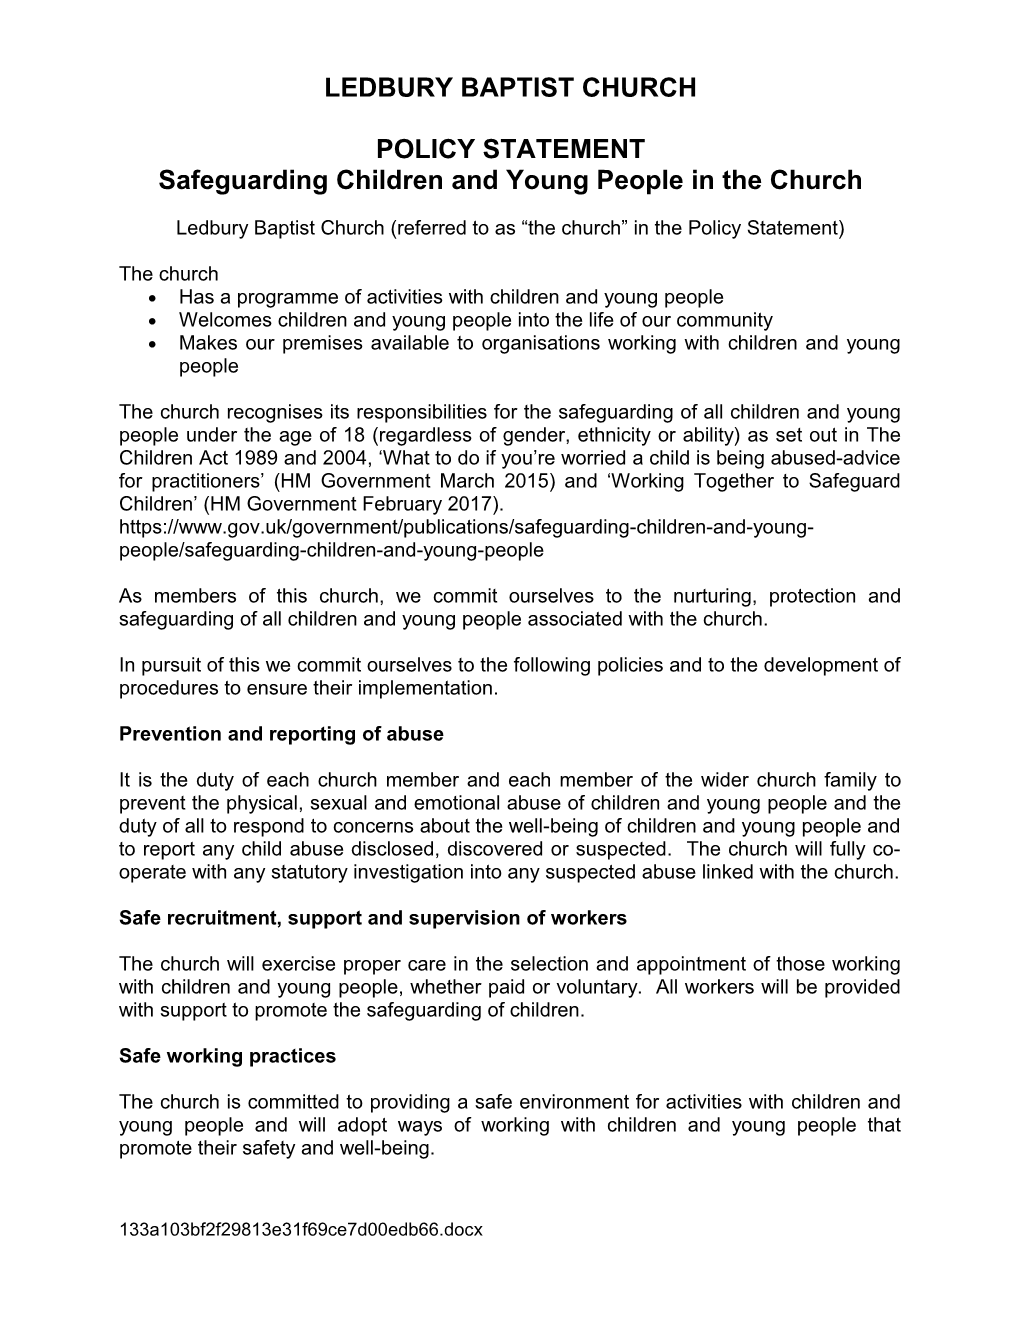 Safeguarding Children and Young People in the Church